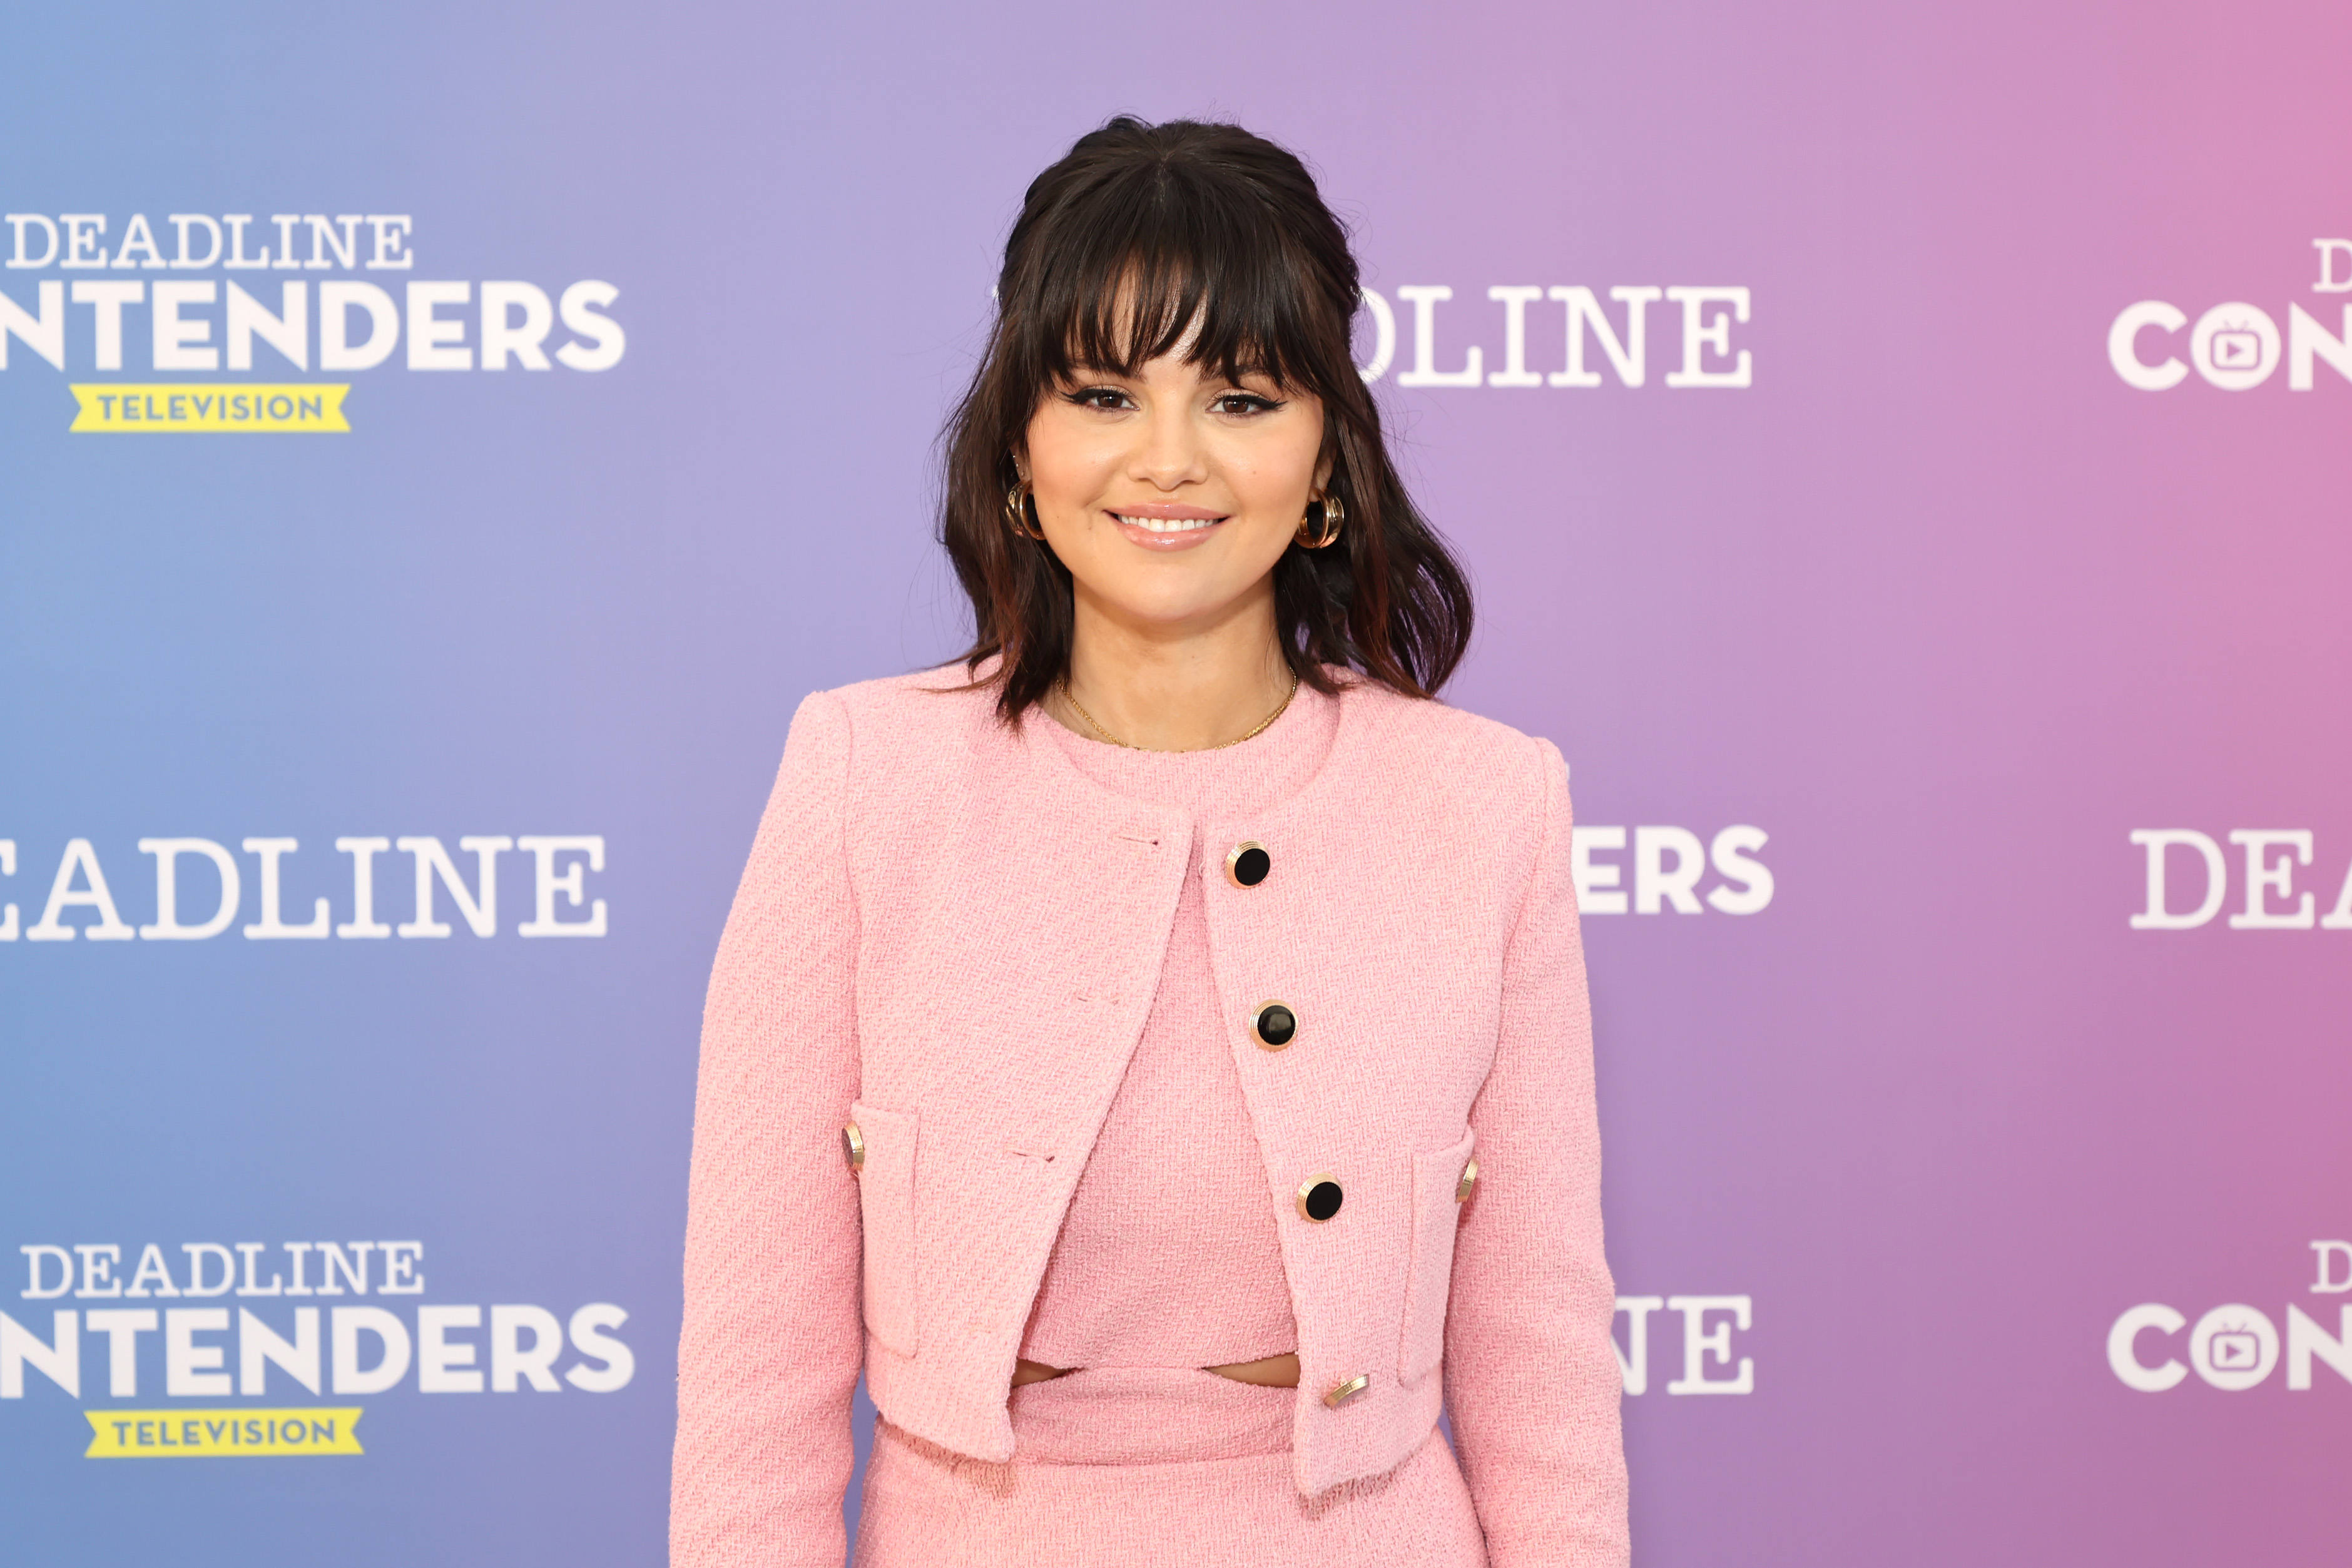 Selena Gomez at the Deadline Contenders Television at Paramount Studios on April 9, 2022, in Los Angeles, California. | Source: Getty Images